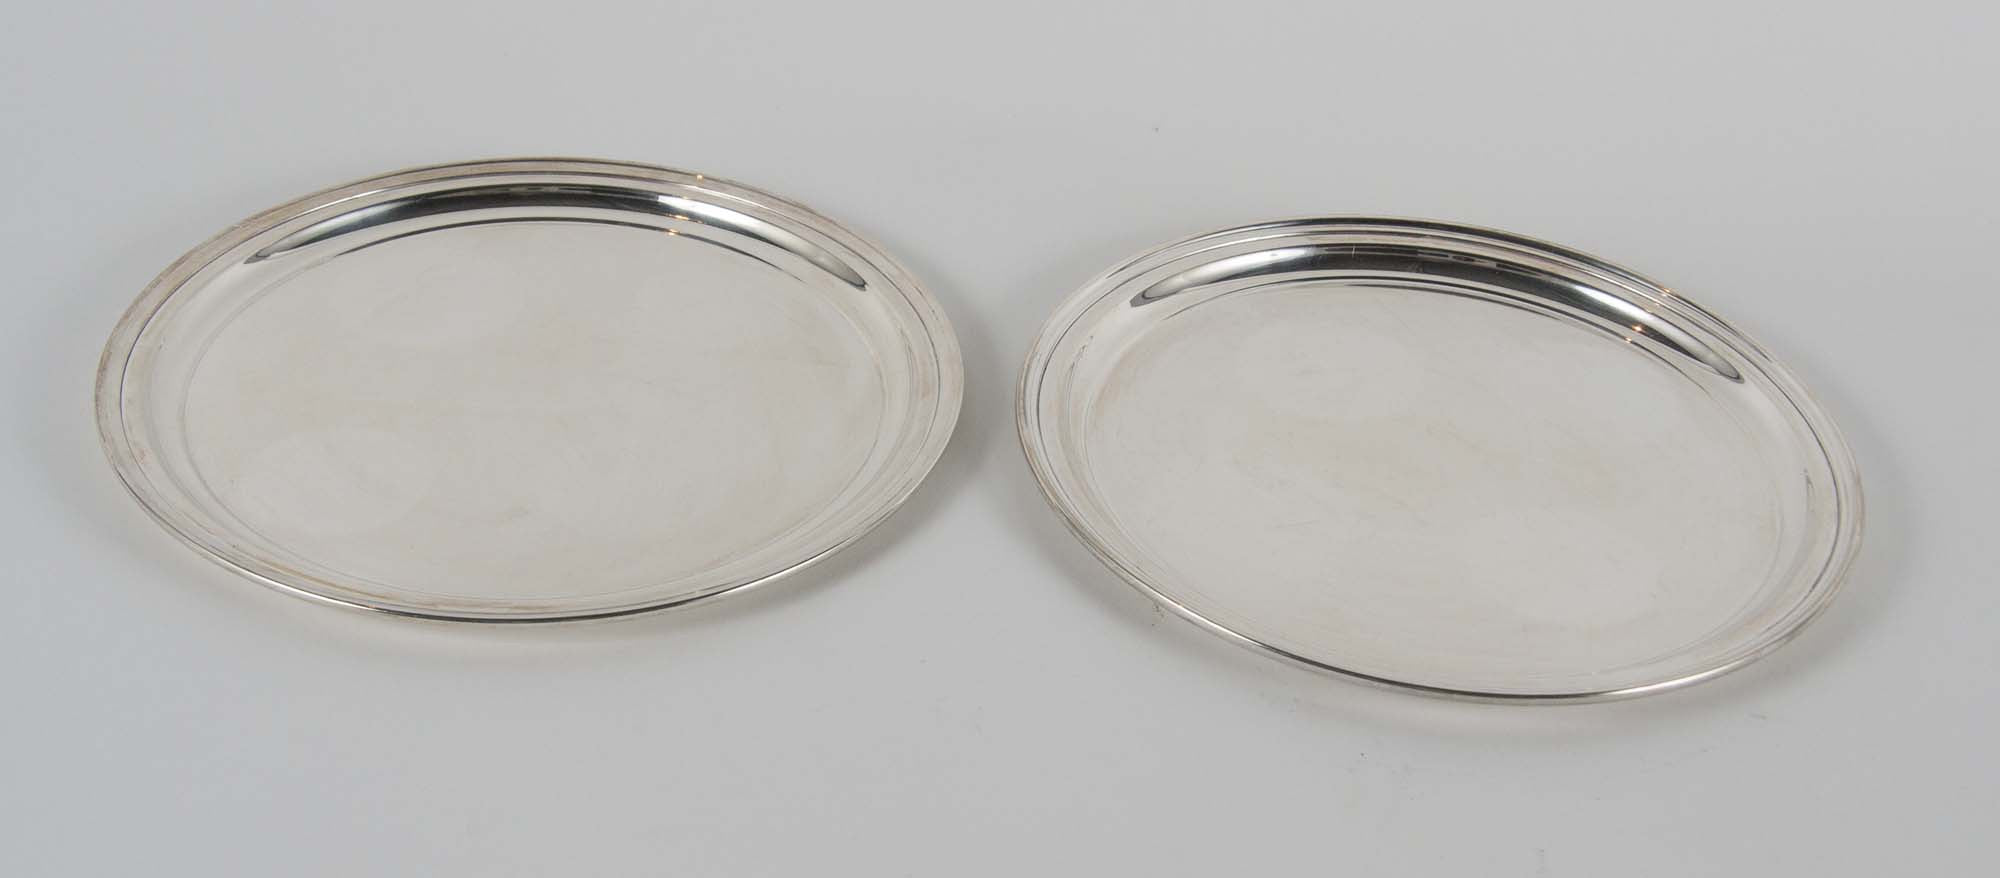 Pair Tiffany and Co Sterling Serving Plates